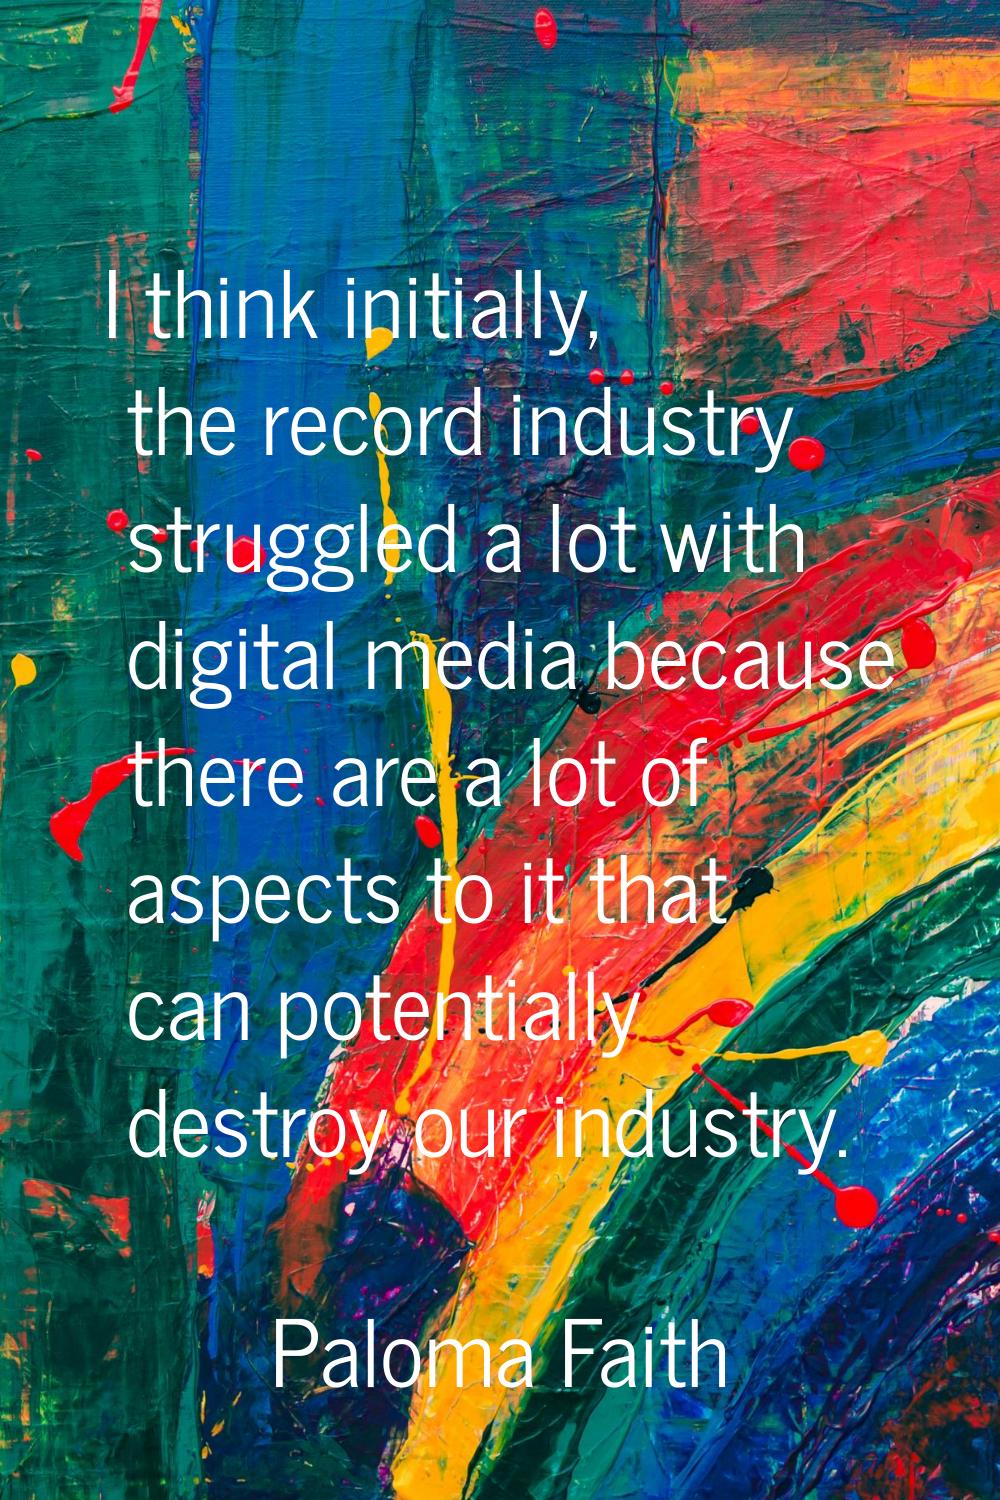 I think initially, the record industry struggled a lot with digital media because there are a lot o